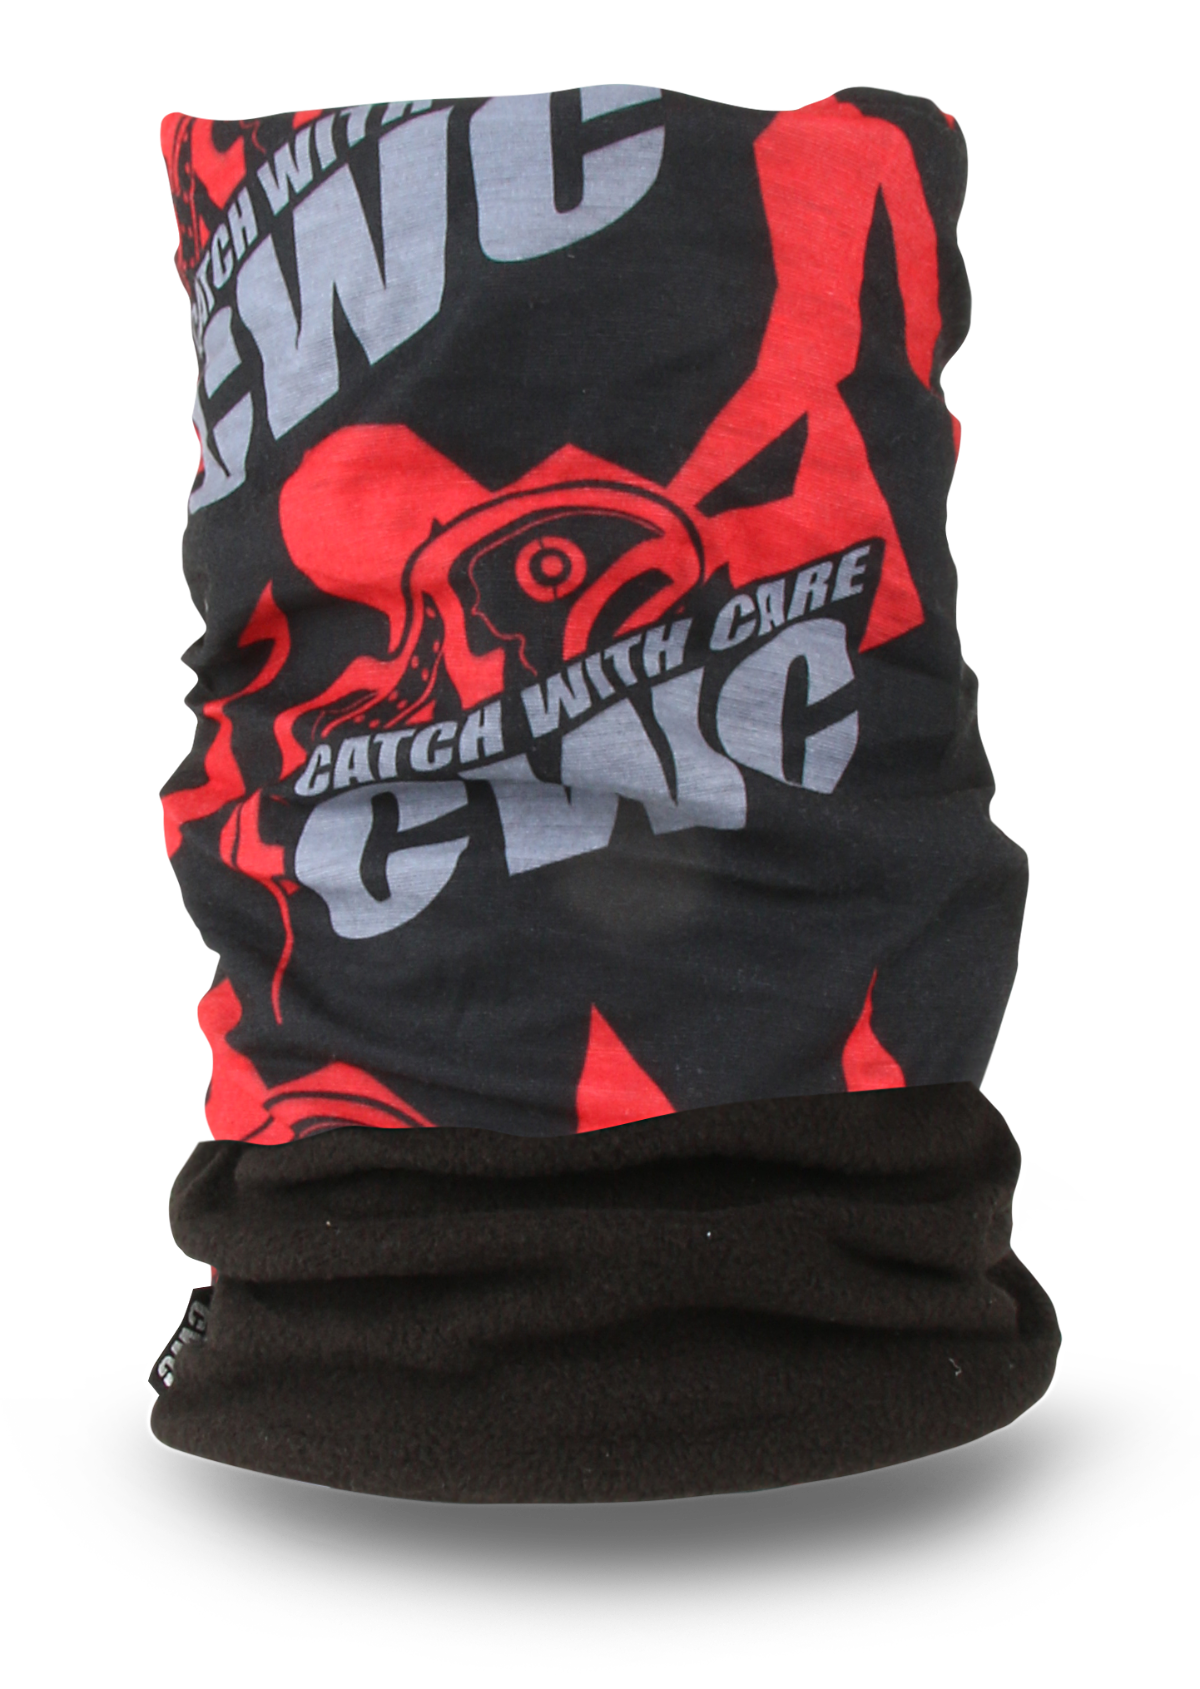 CWC Polar Gaiter With Fleece red and black with catch with care logo